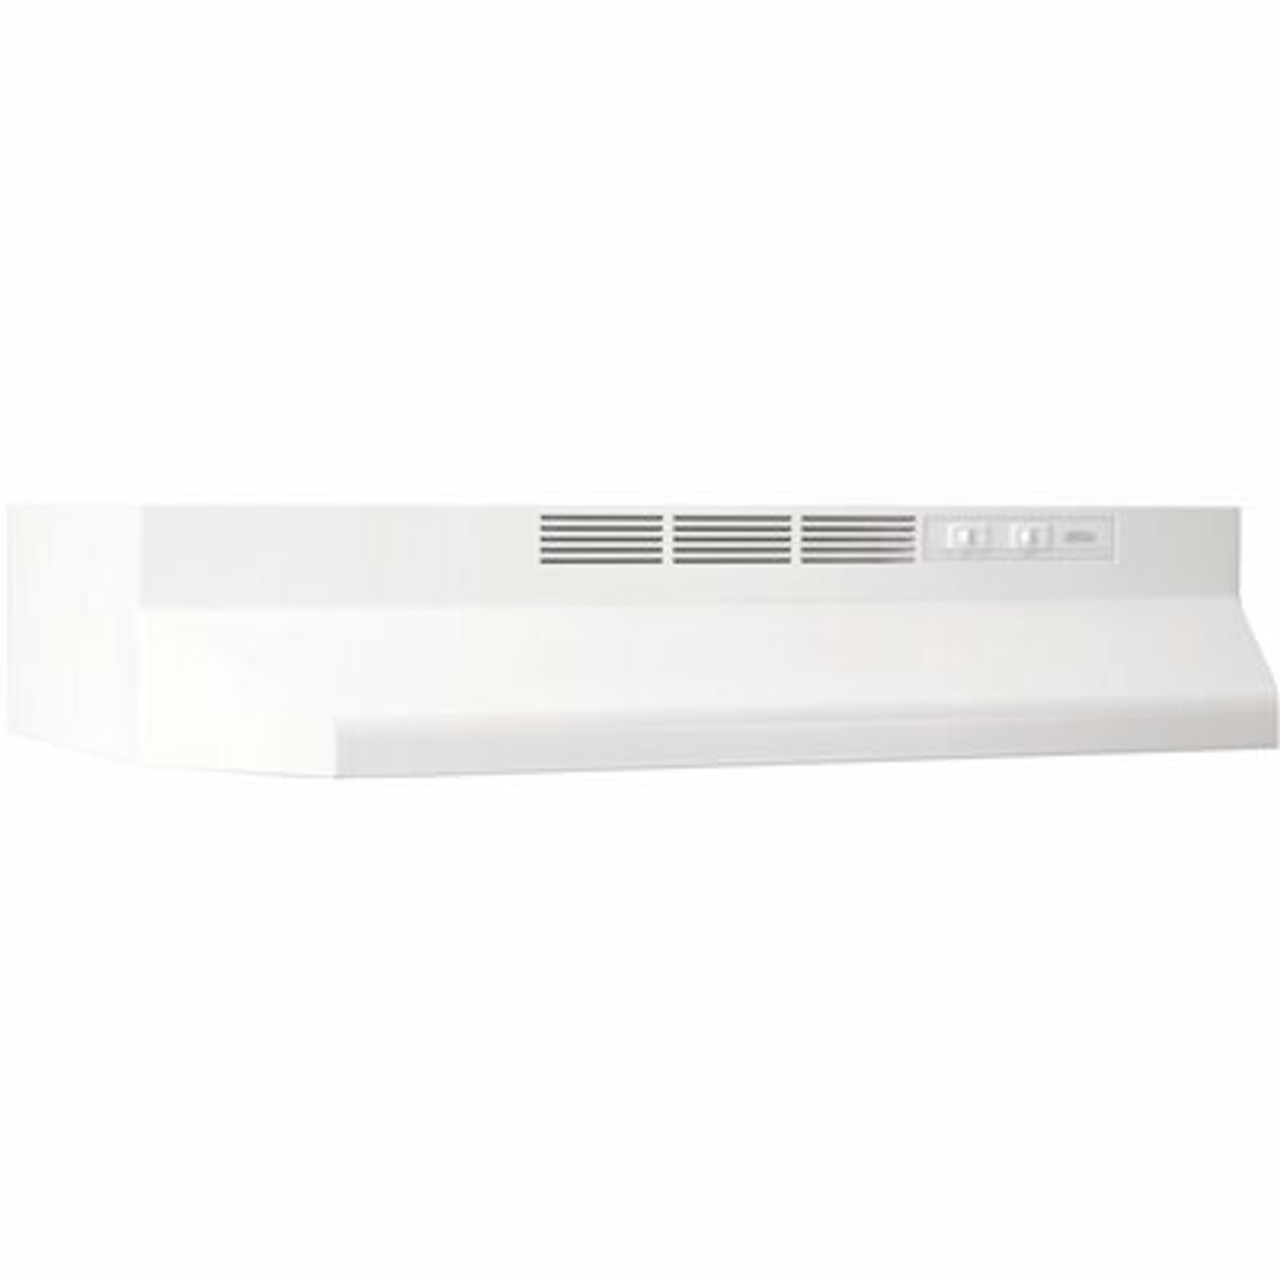 Broan-Nutone Buez1 36 In. Ductless Under Cabinet Range Hood With Light And Easy Install System In White